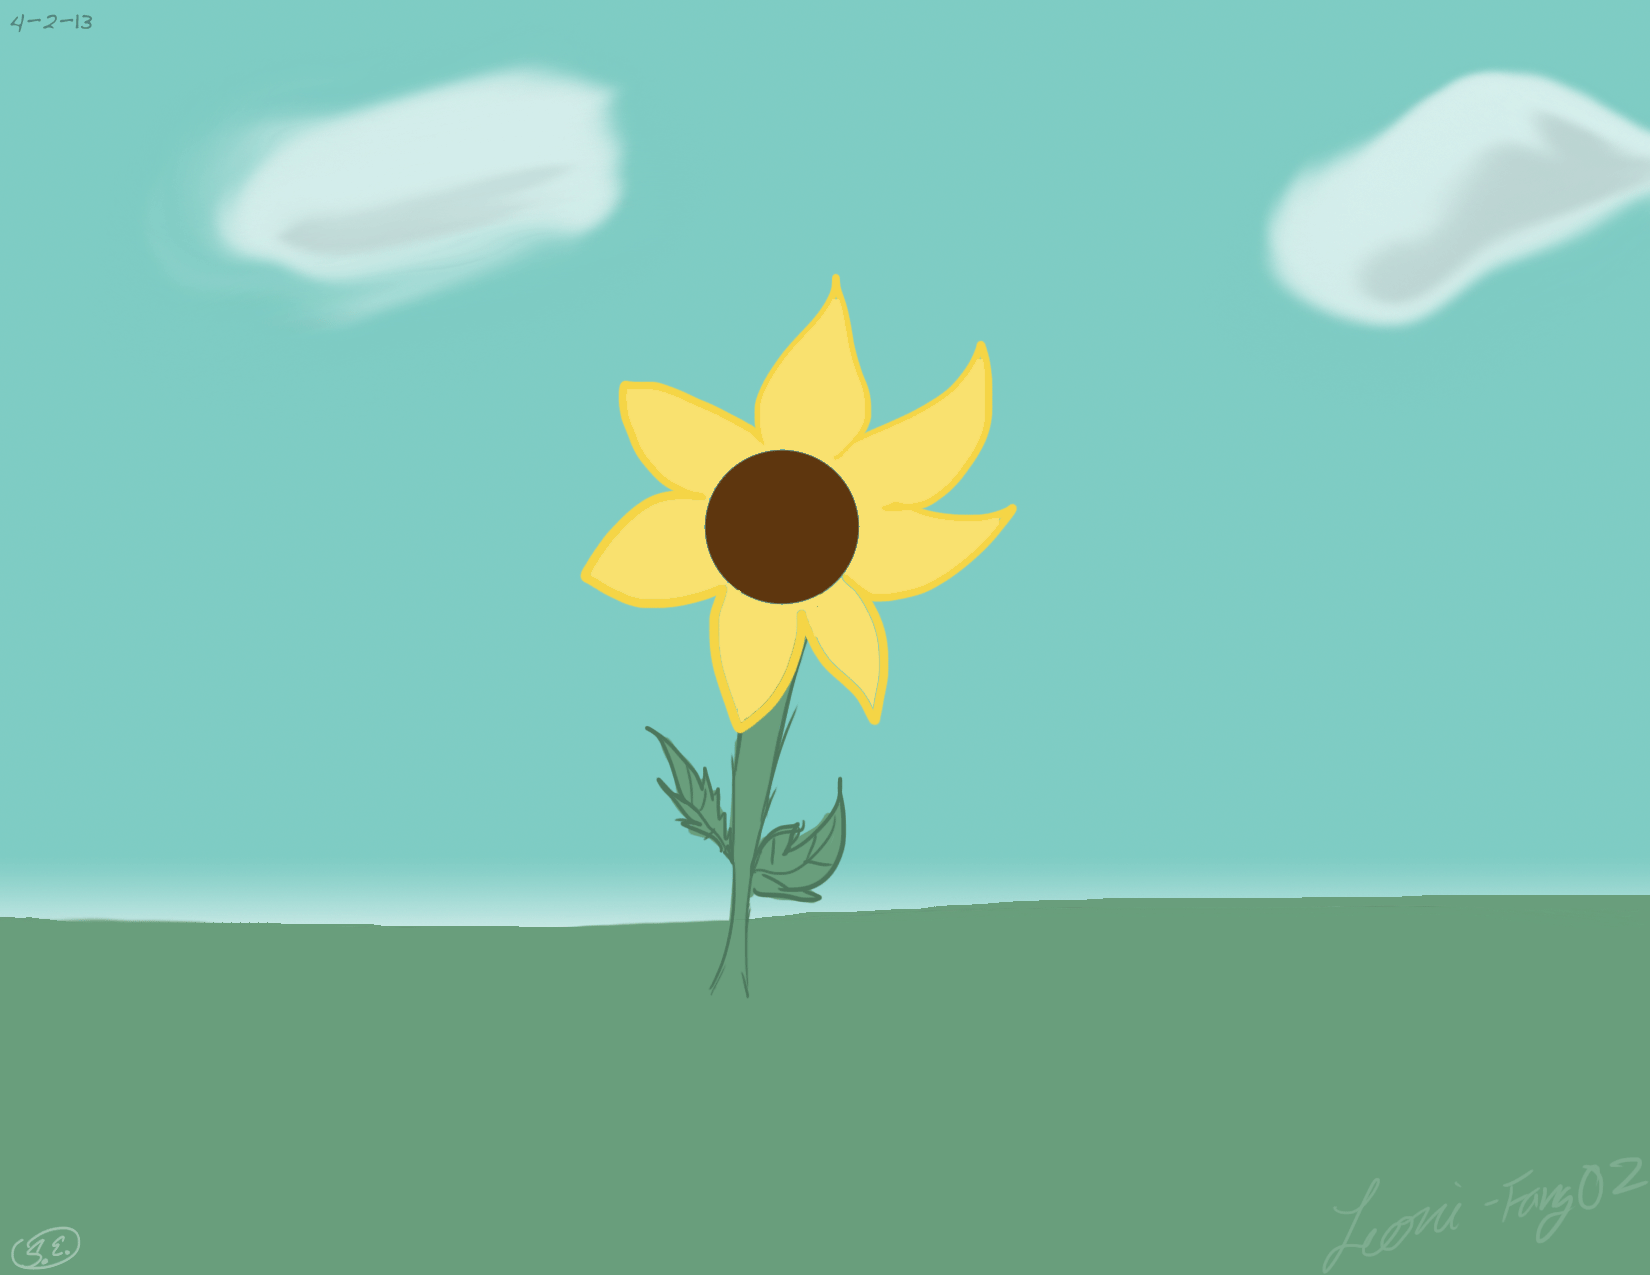 Sunflower Animation by Leoni-Fang02 on DeviantArt